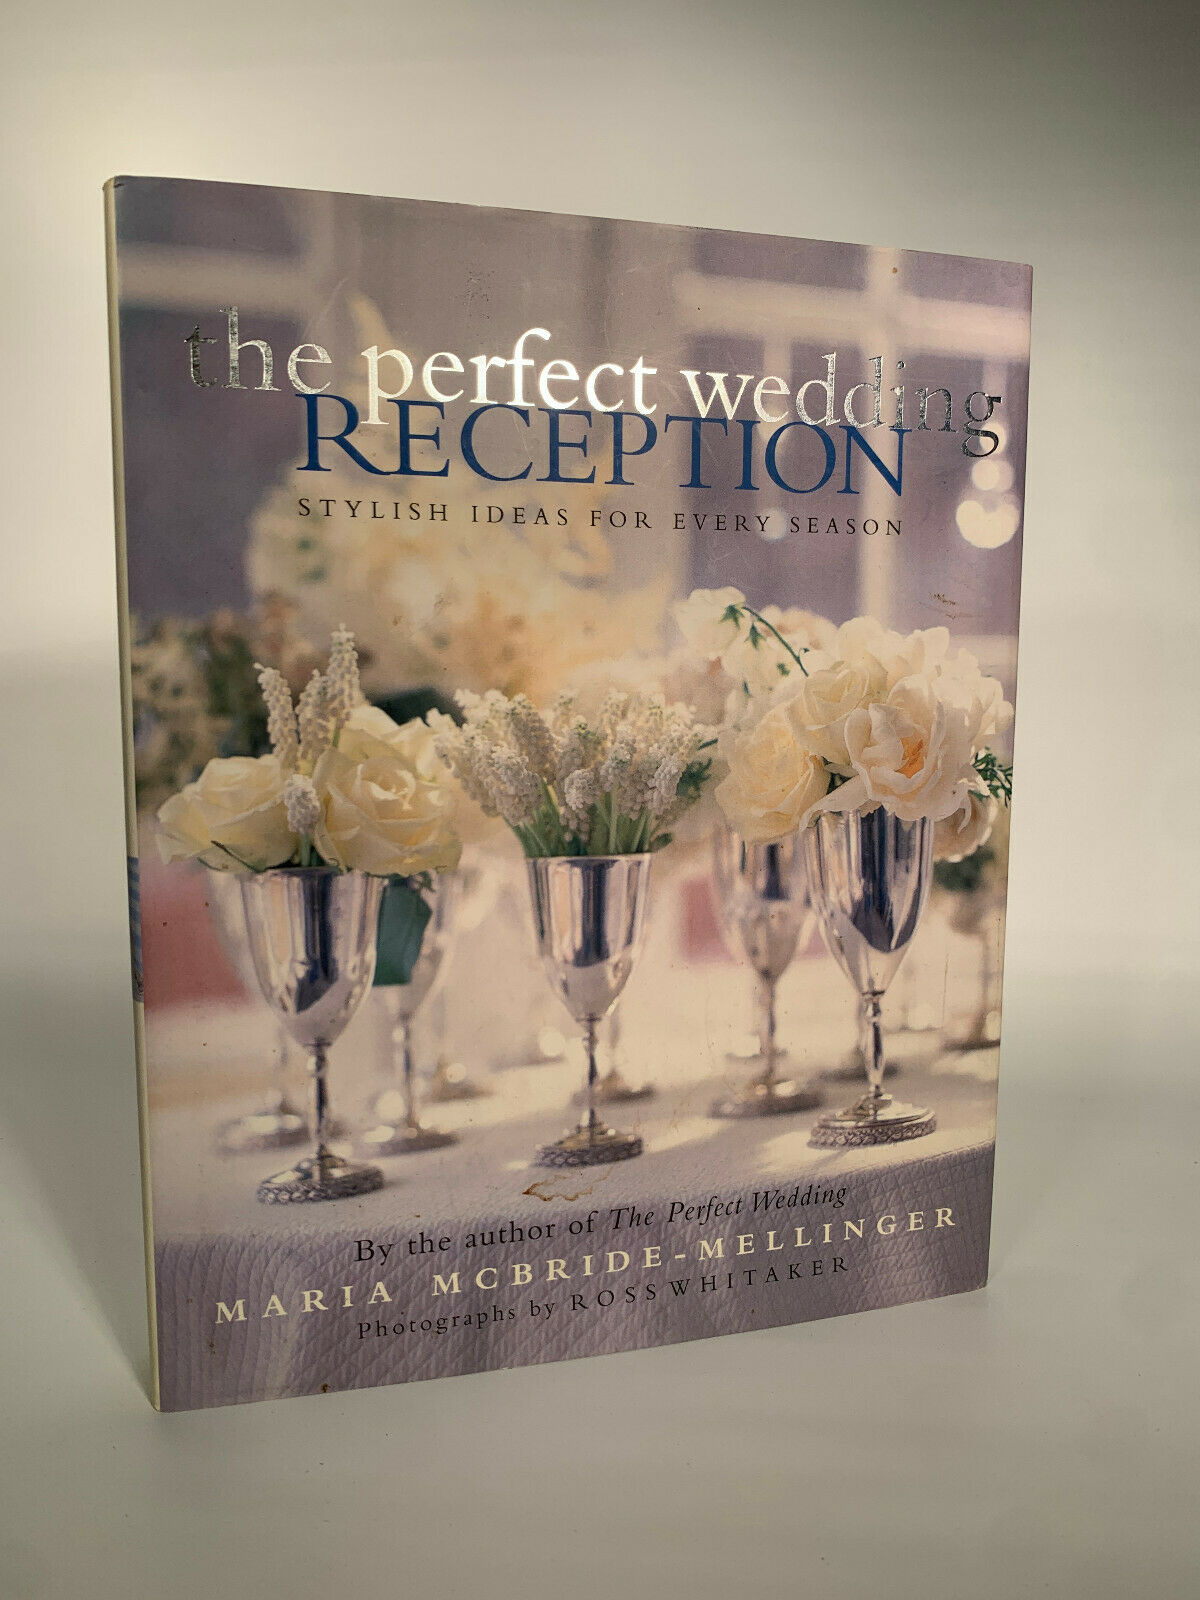 The Perfect Wedding Reception: Stylish Ideas For Every Season by Maria McBride-